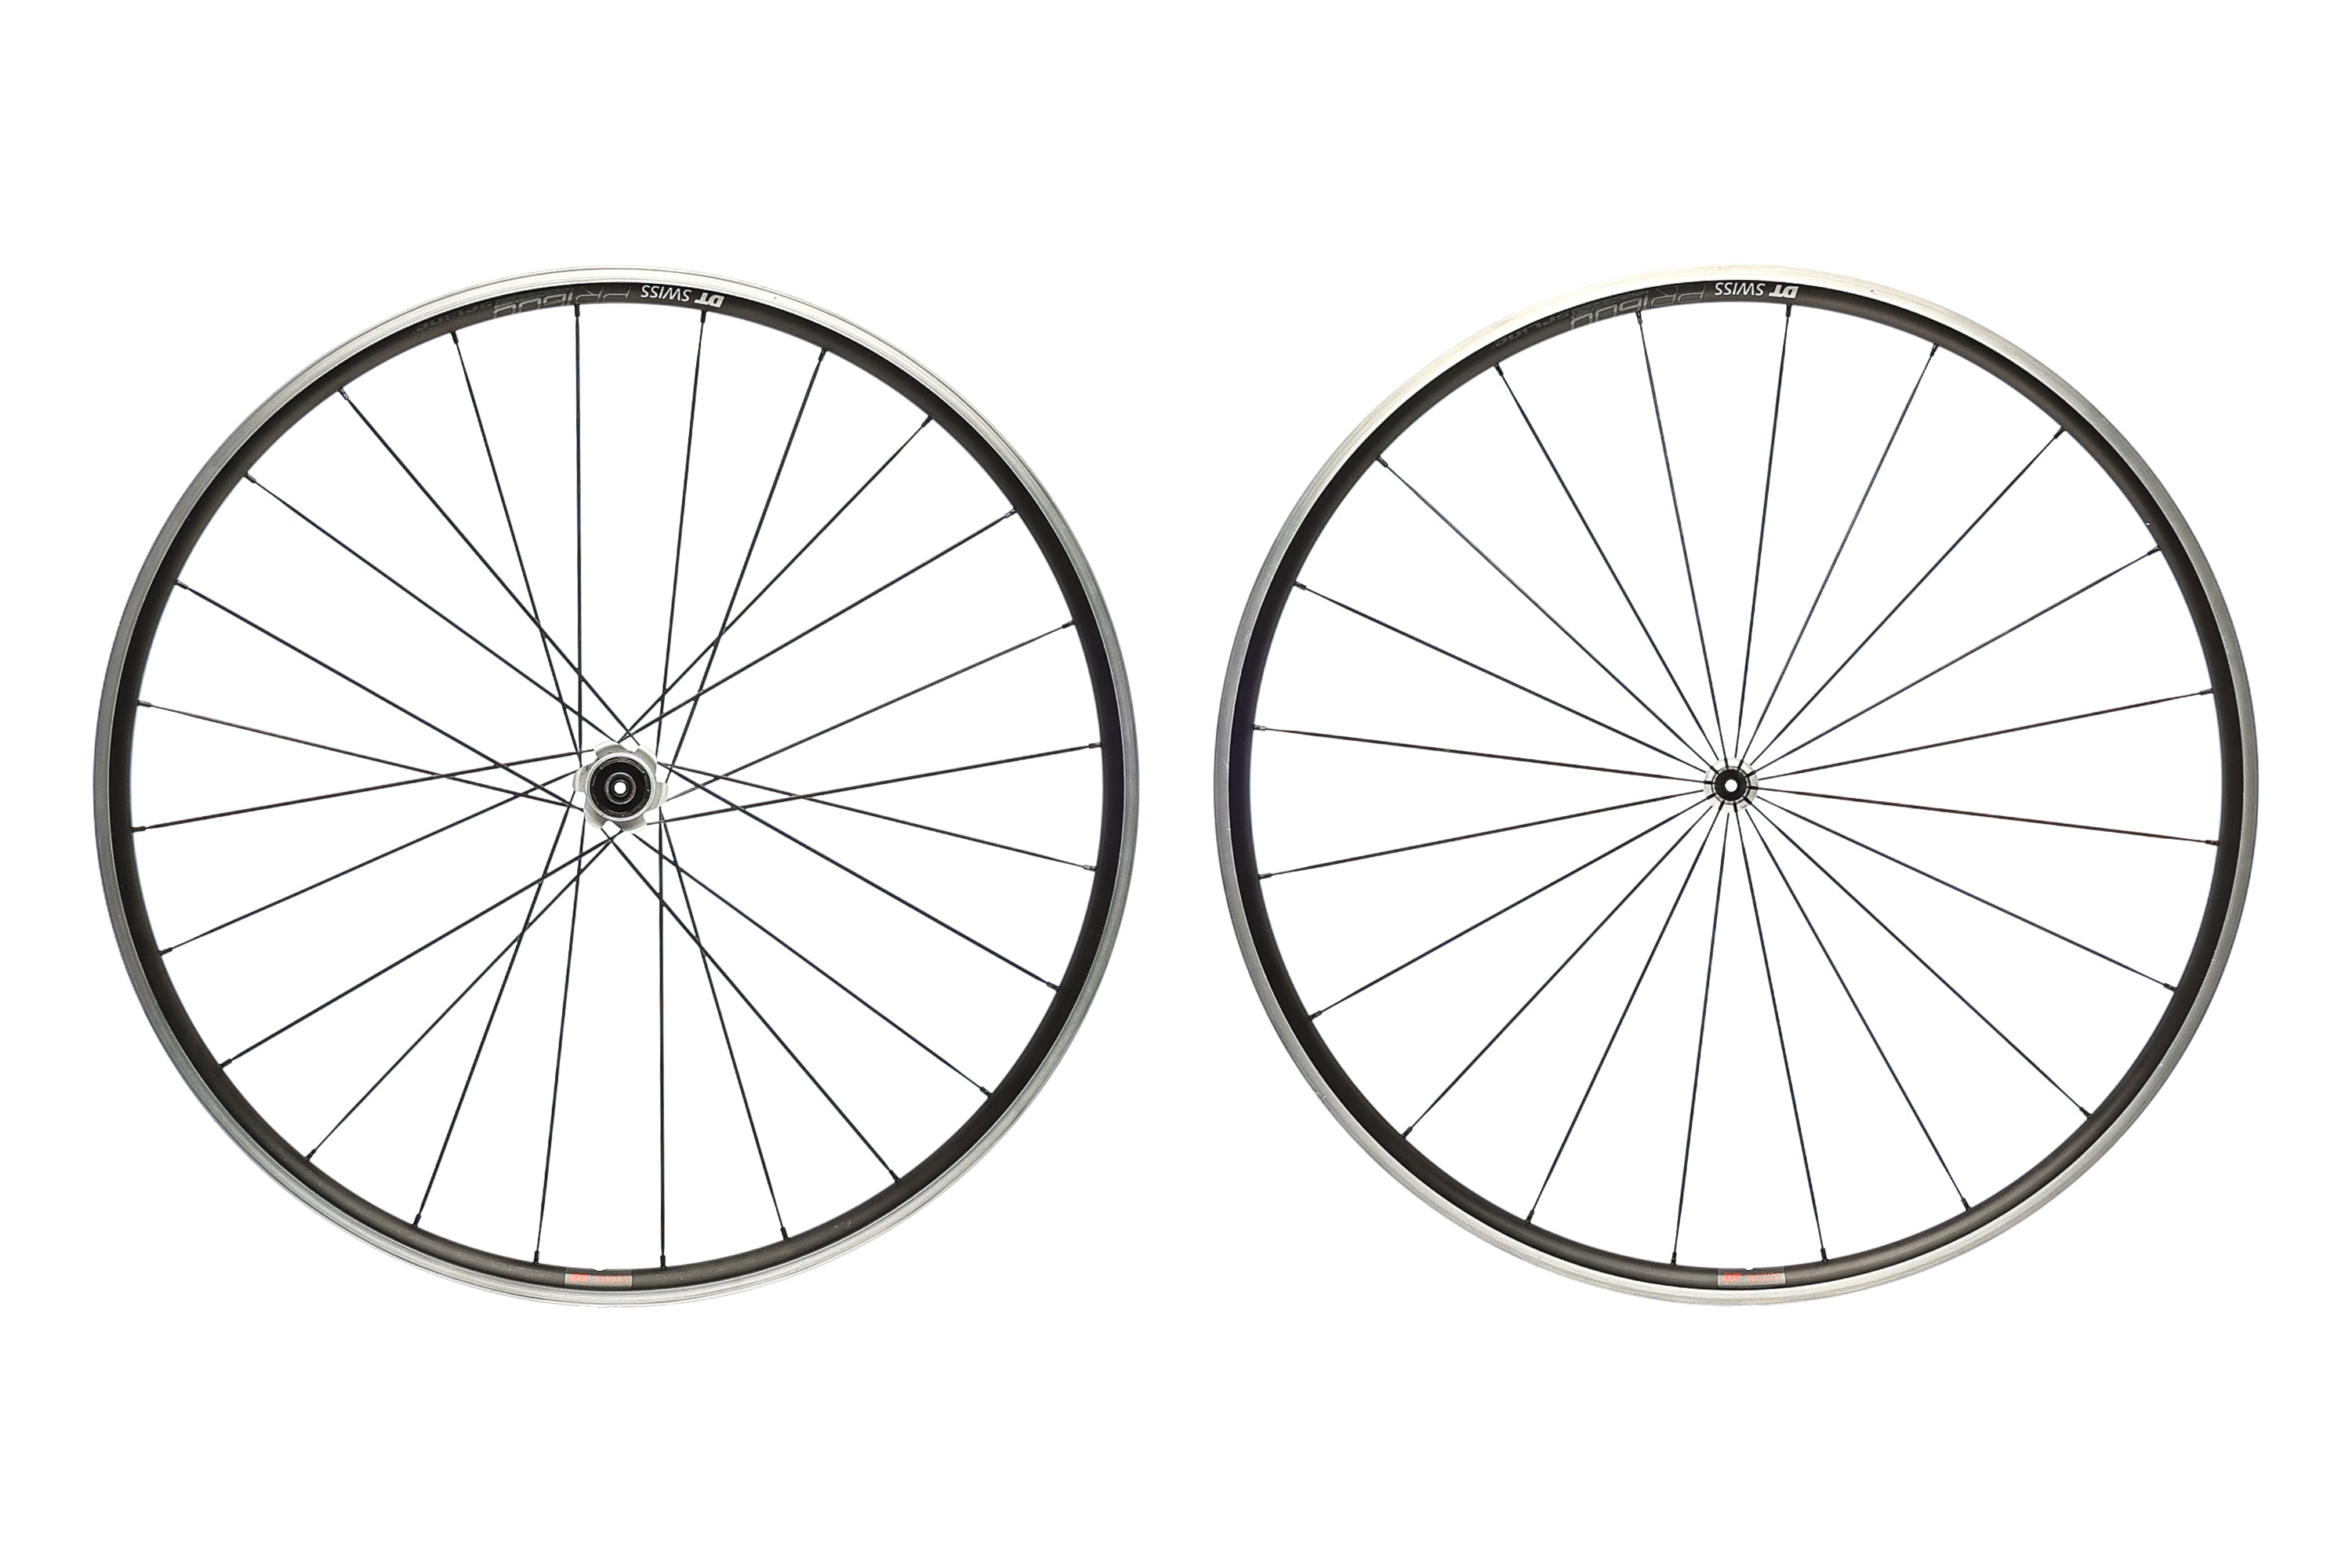 DT Swiss R 470 Wheelsets - Weight, Review, Specs, Price | Rims 